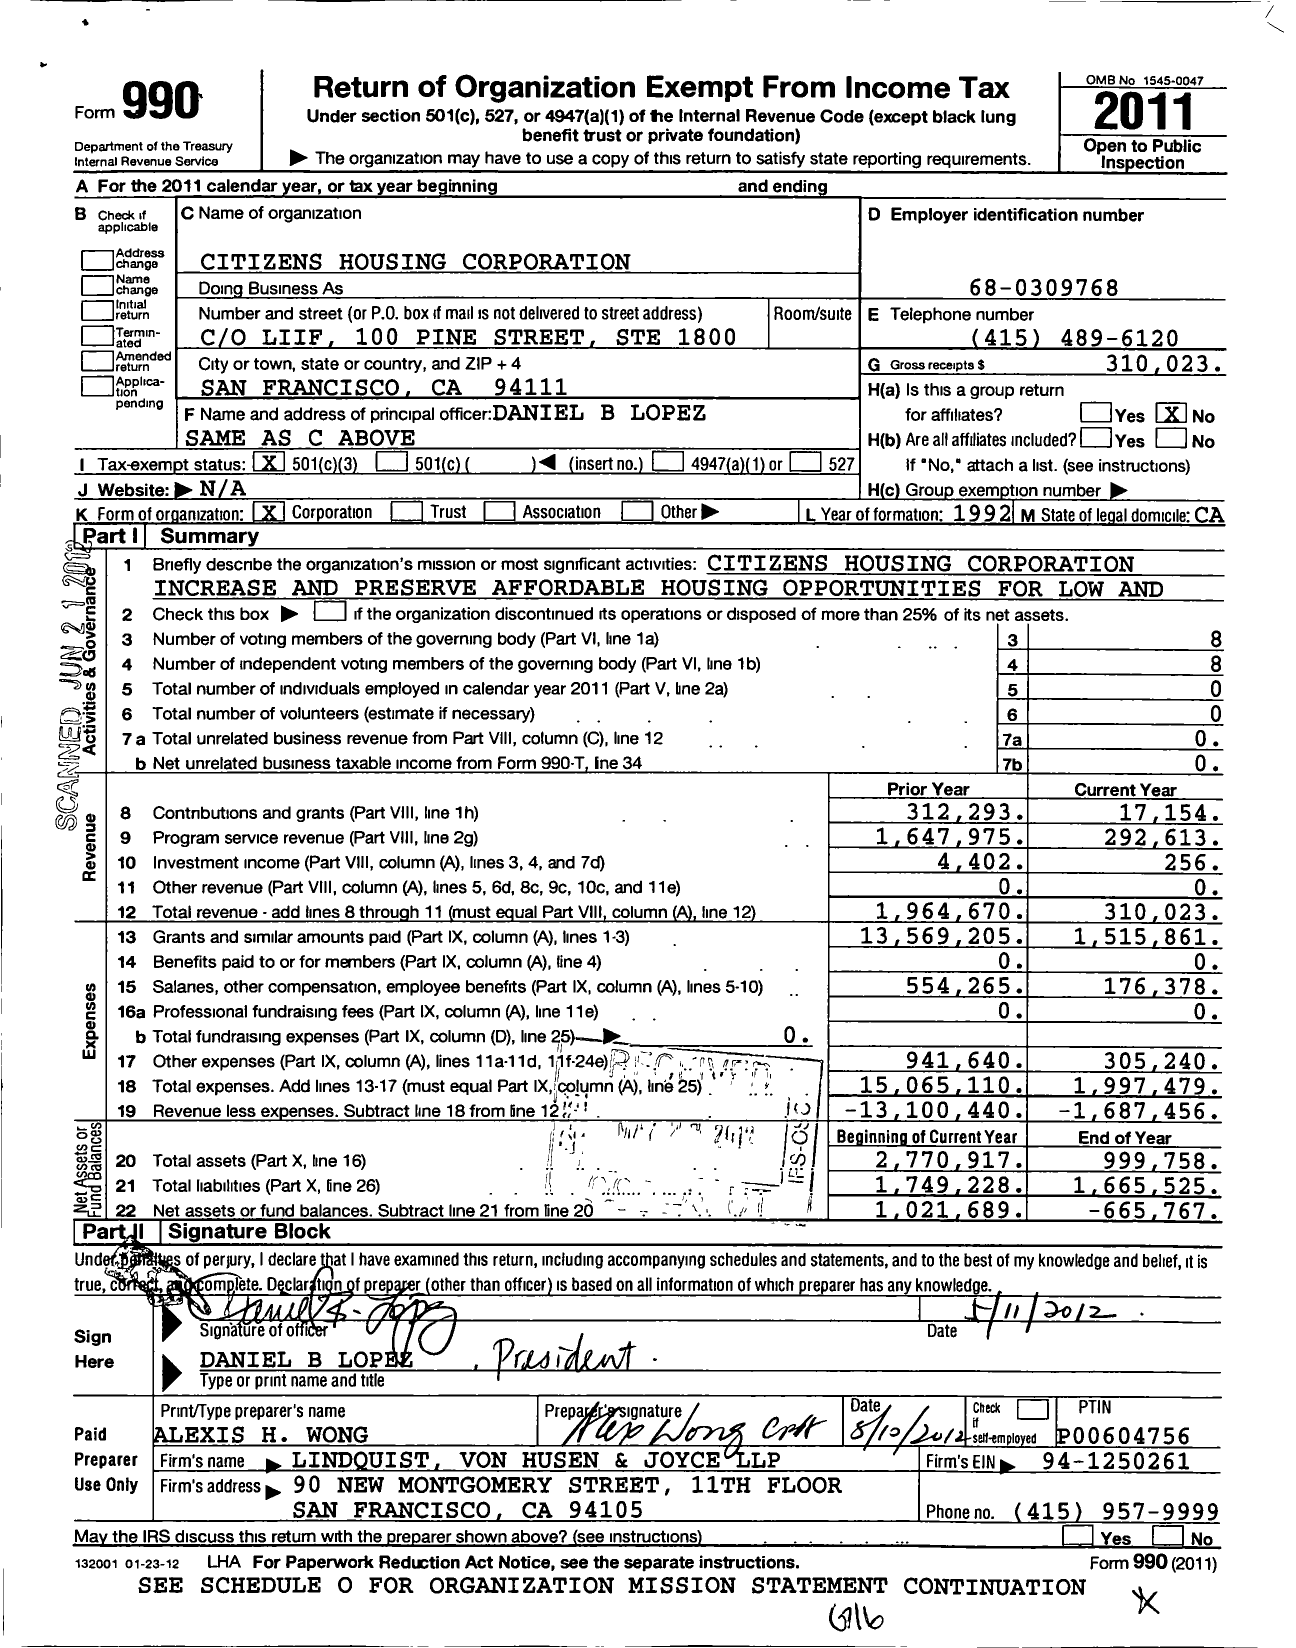 Image of first page of 2011 Form 990 for Citizens Housing Corporation